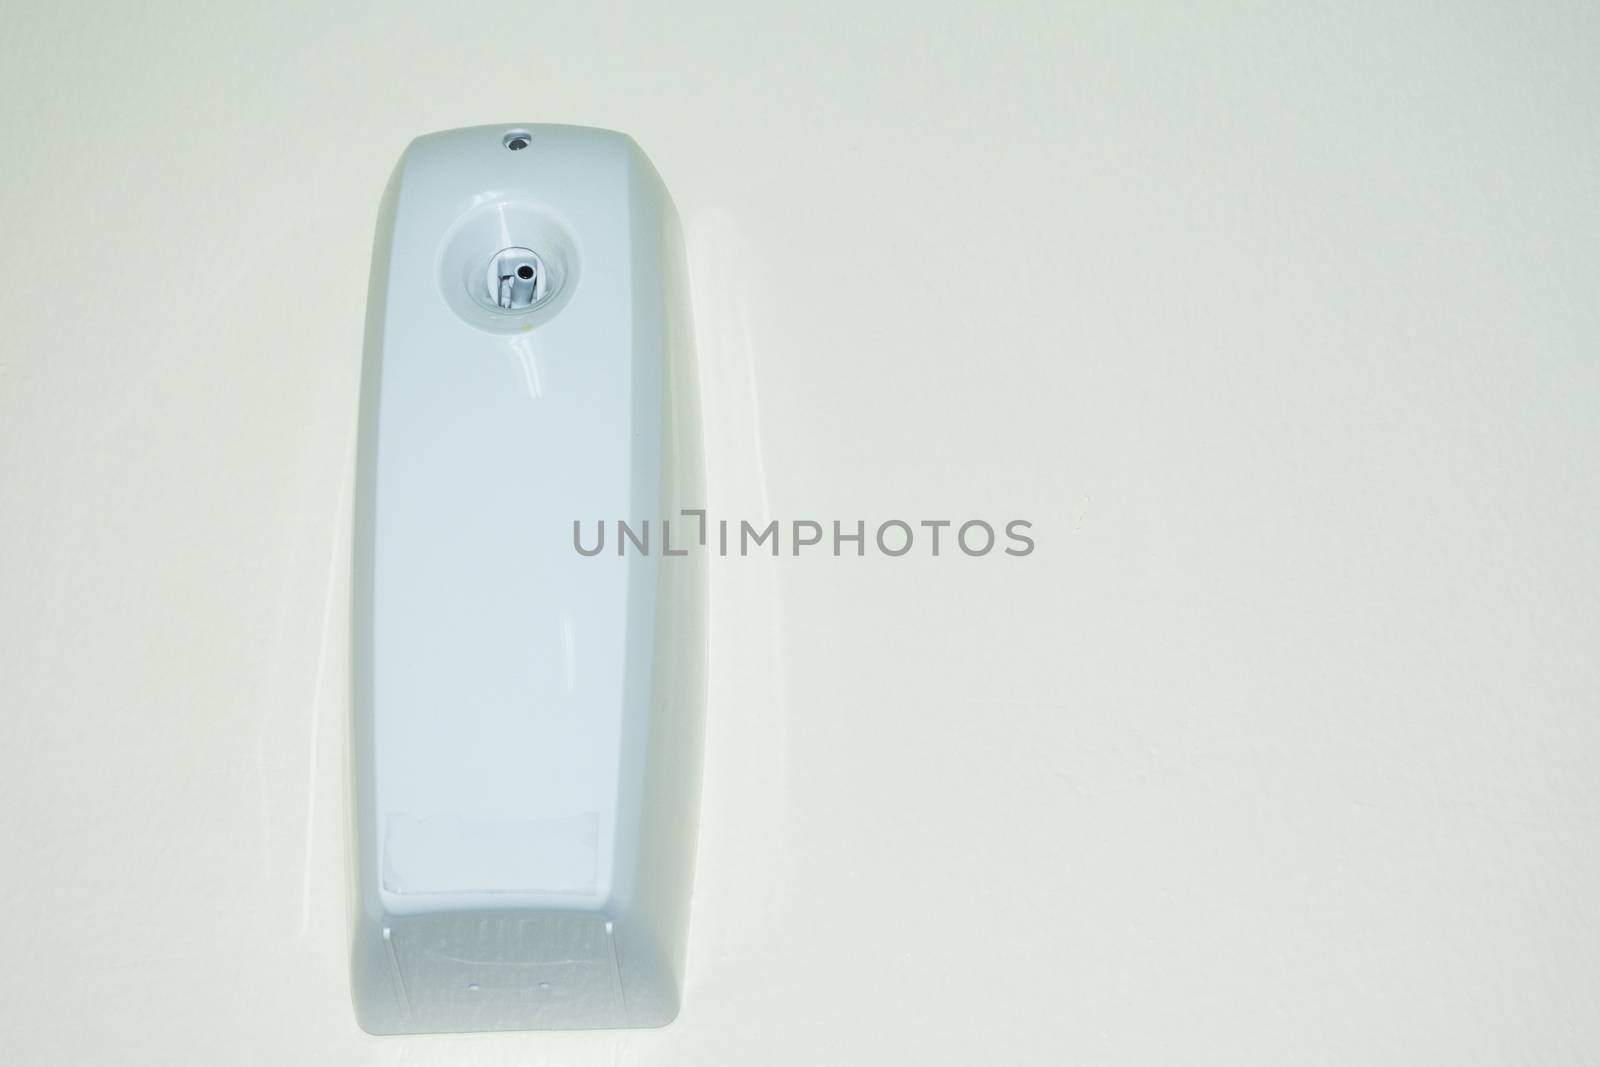 aromatic odor spray dispenser on the wall on a timer to add frag by kingmaphotos